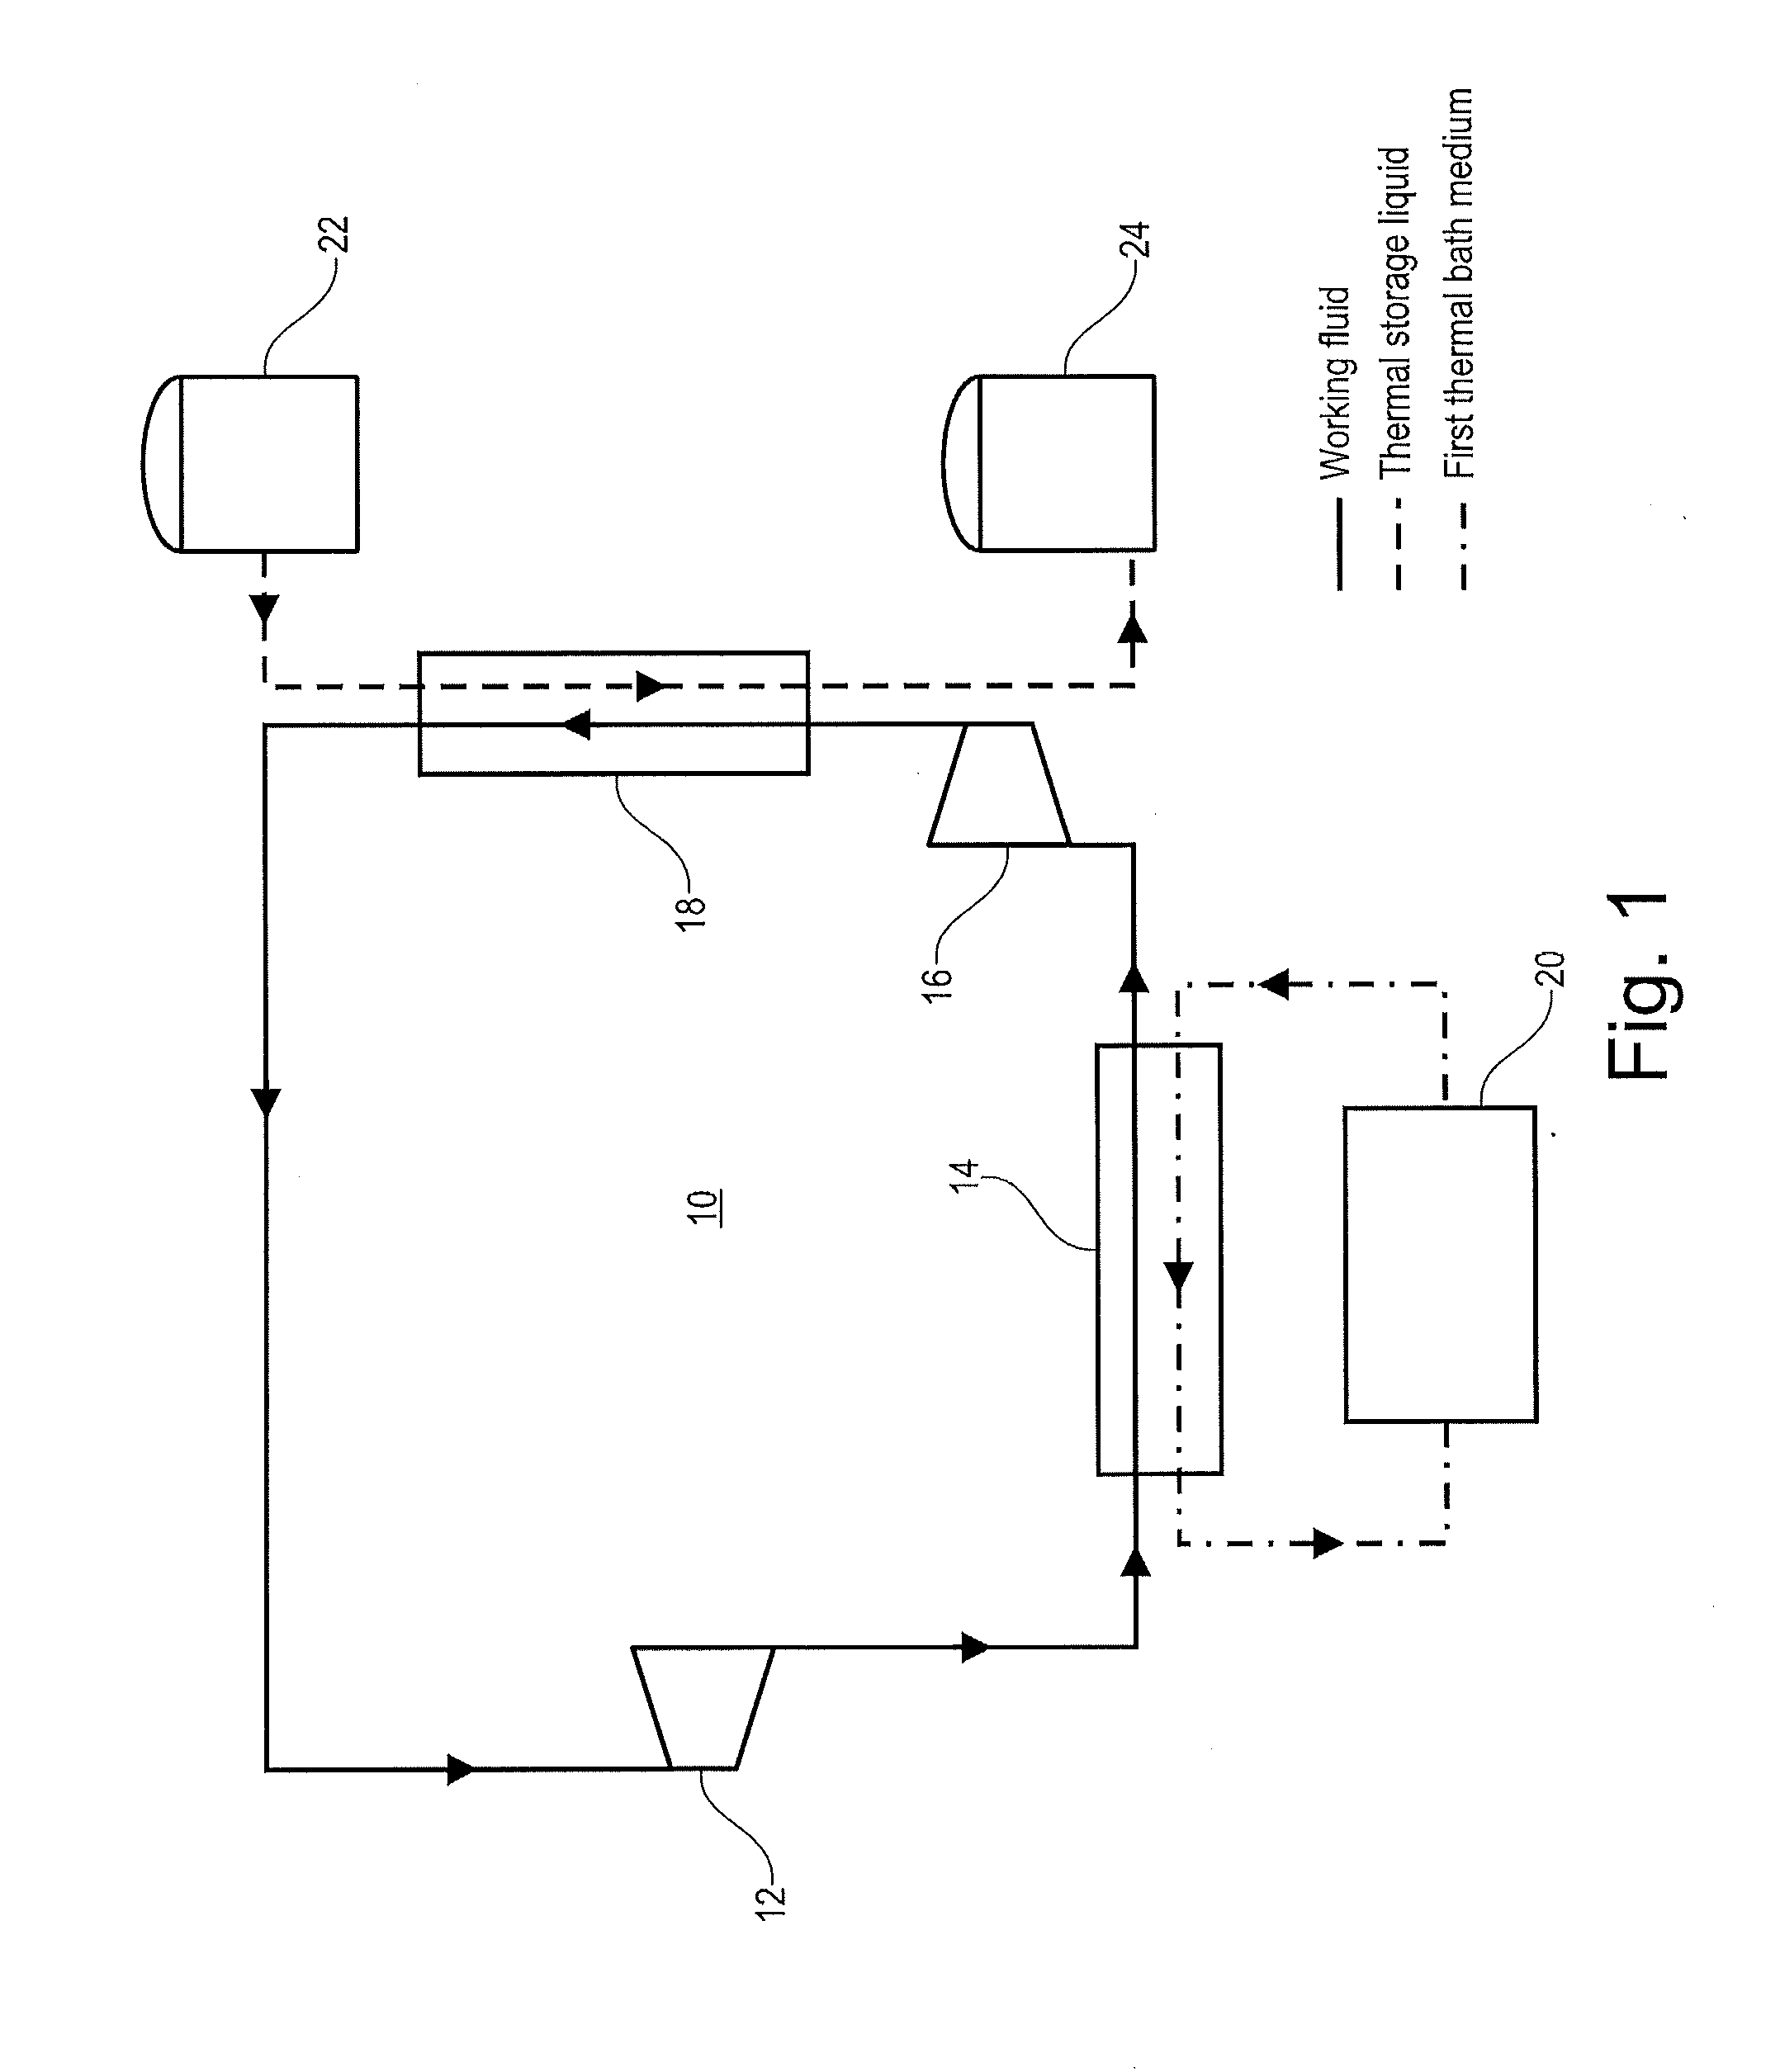 Thermoelectric energy storage system having two thermal baths and method for storing thermoelectric energy